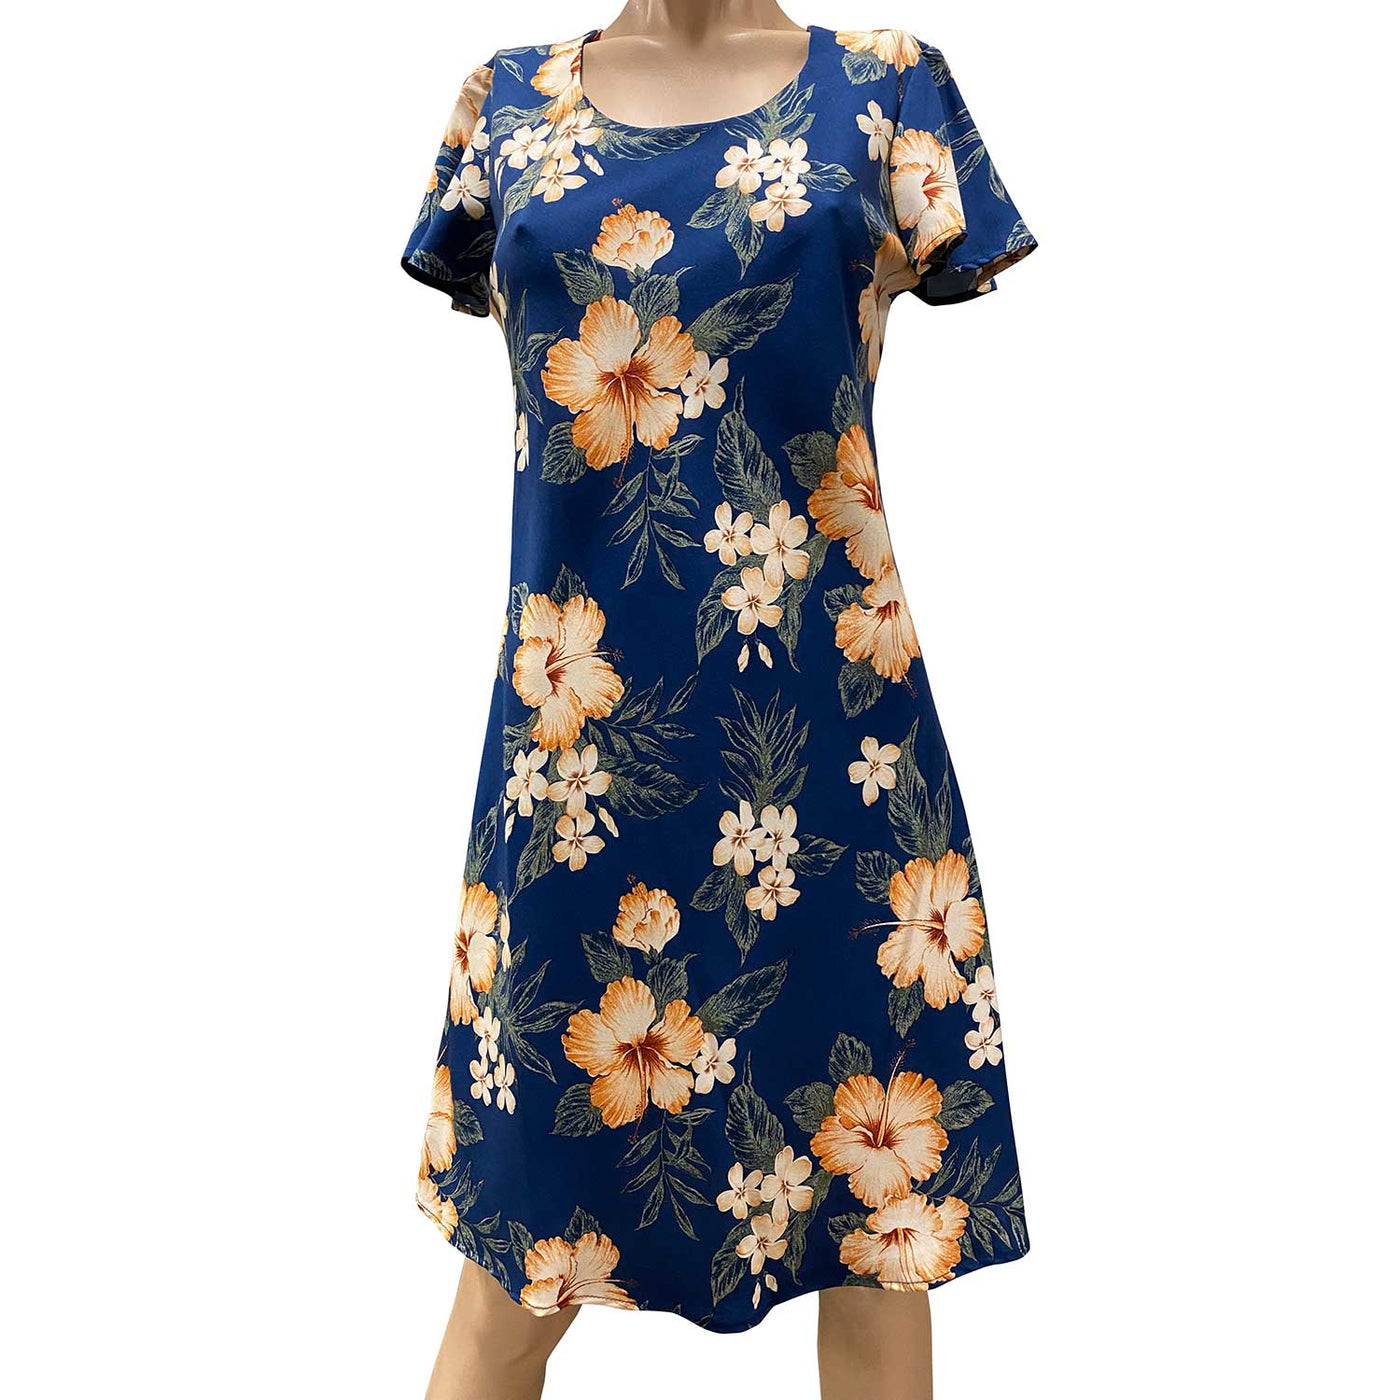 Hibiscus Resort Navy A-Line Dress with Cap Sleeves